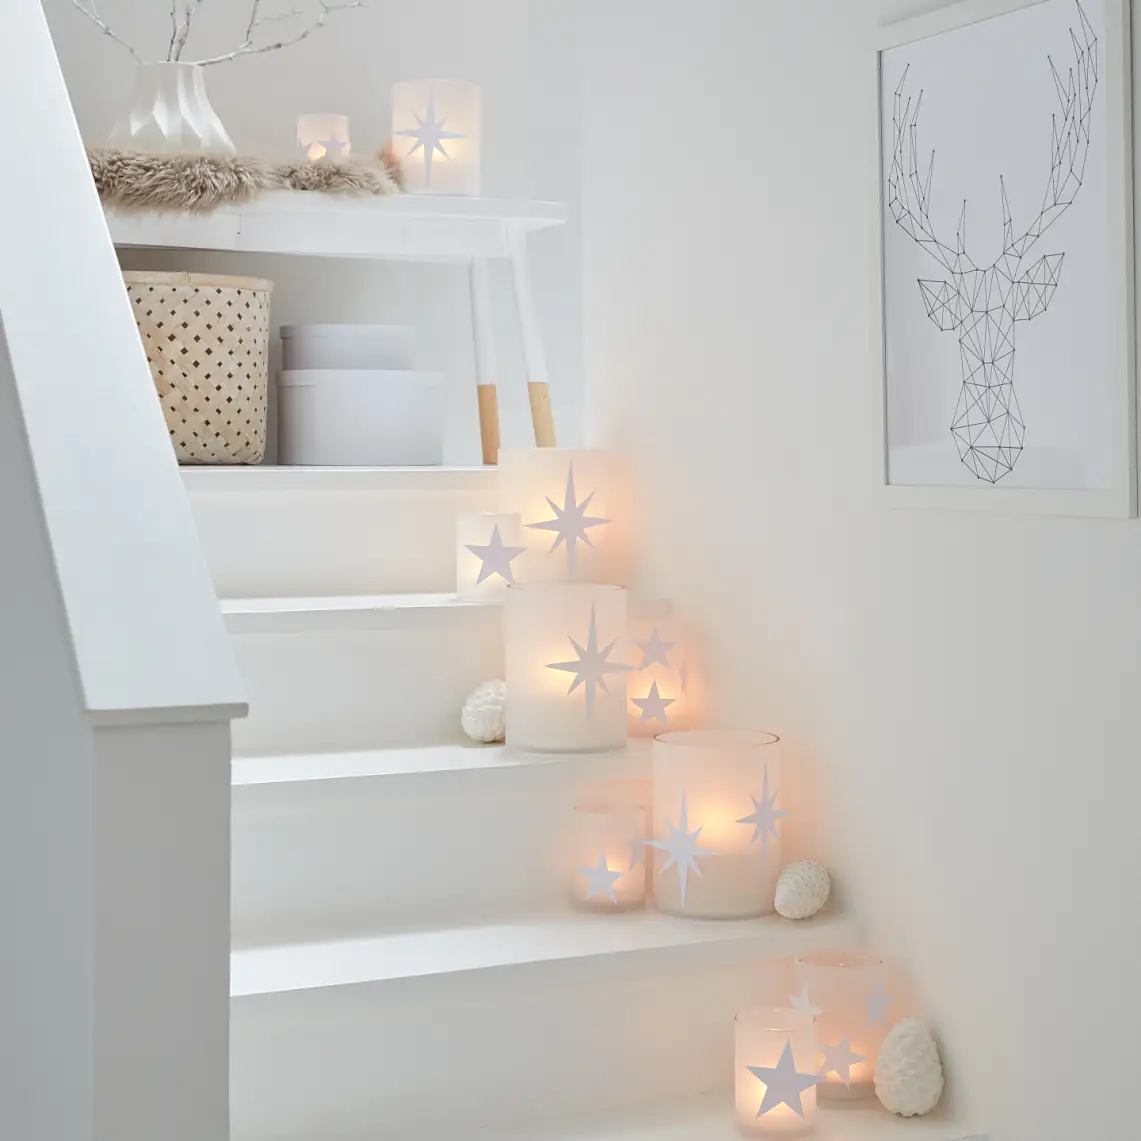 This stairs decoration puts candles (safely!) in the limelight - and it looks beautiful. Especially when the DIY candle holders are decorated with paper stars.